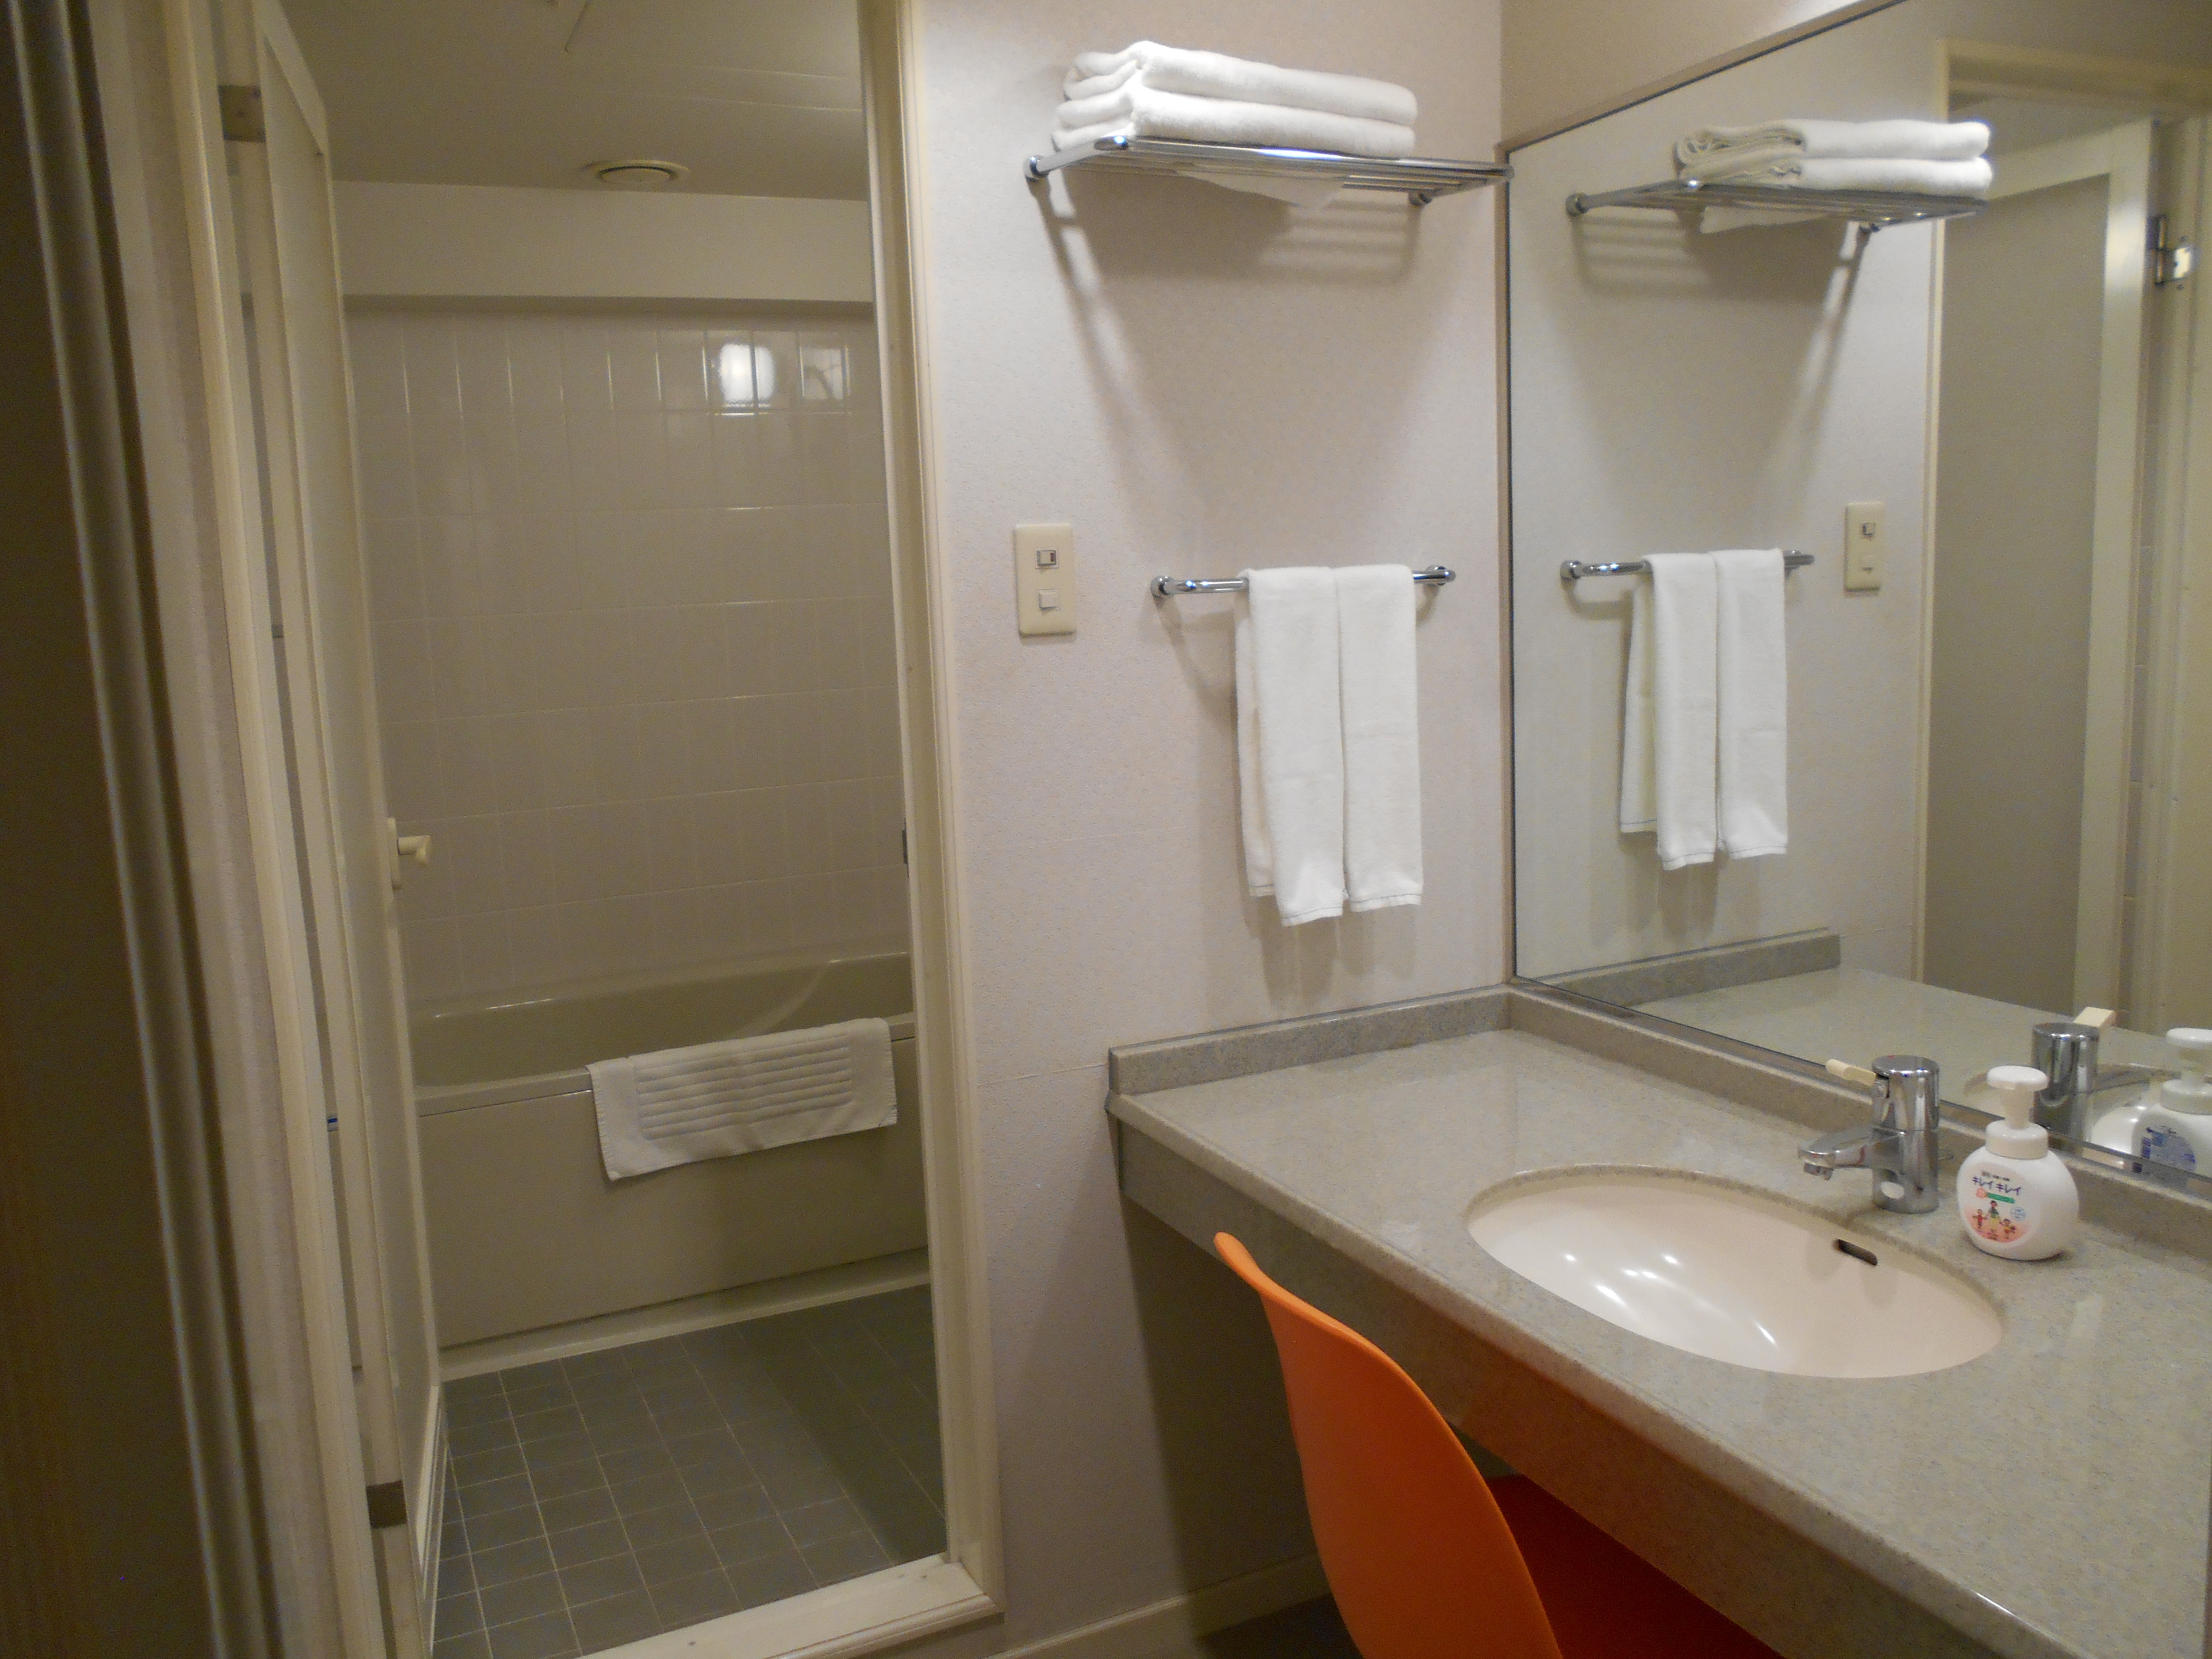 The deluxe twin room has a bath ☆ toilet ☆ separate washroom ♪